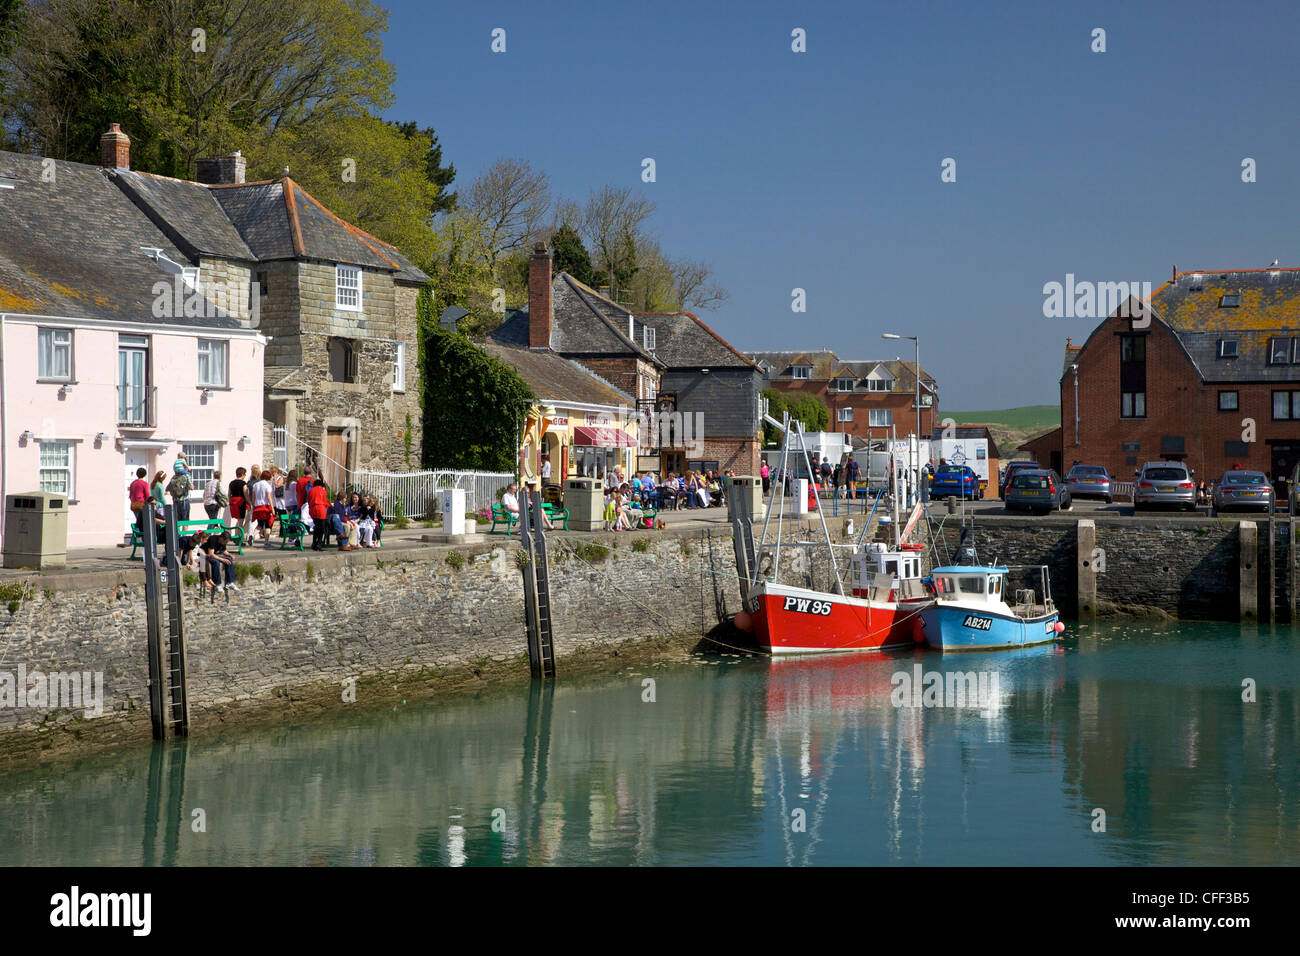 Fishing boats in Padstow Harbour, Camel Estuary, North Cornwall, England, United Kingdom, Europe Stock Photo